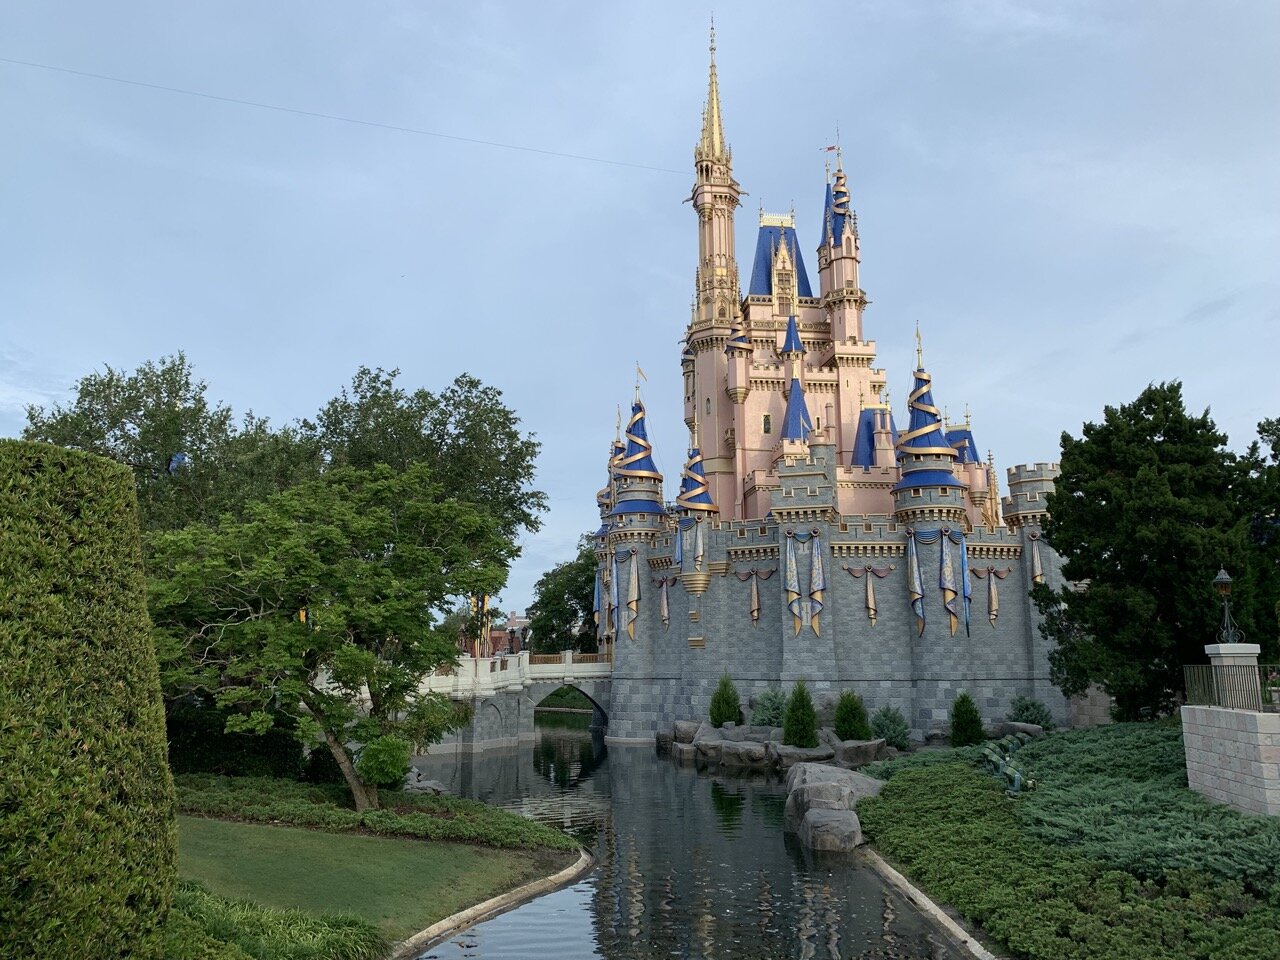 12 Things for Adults to Do at Walt Disney World Resort